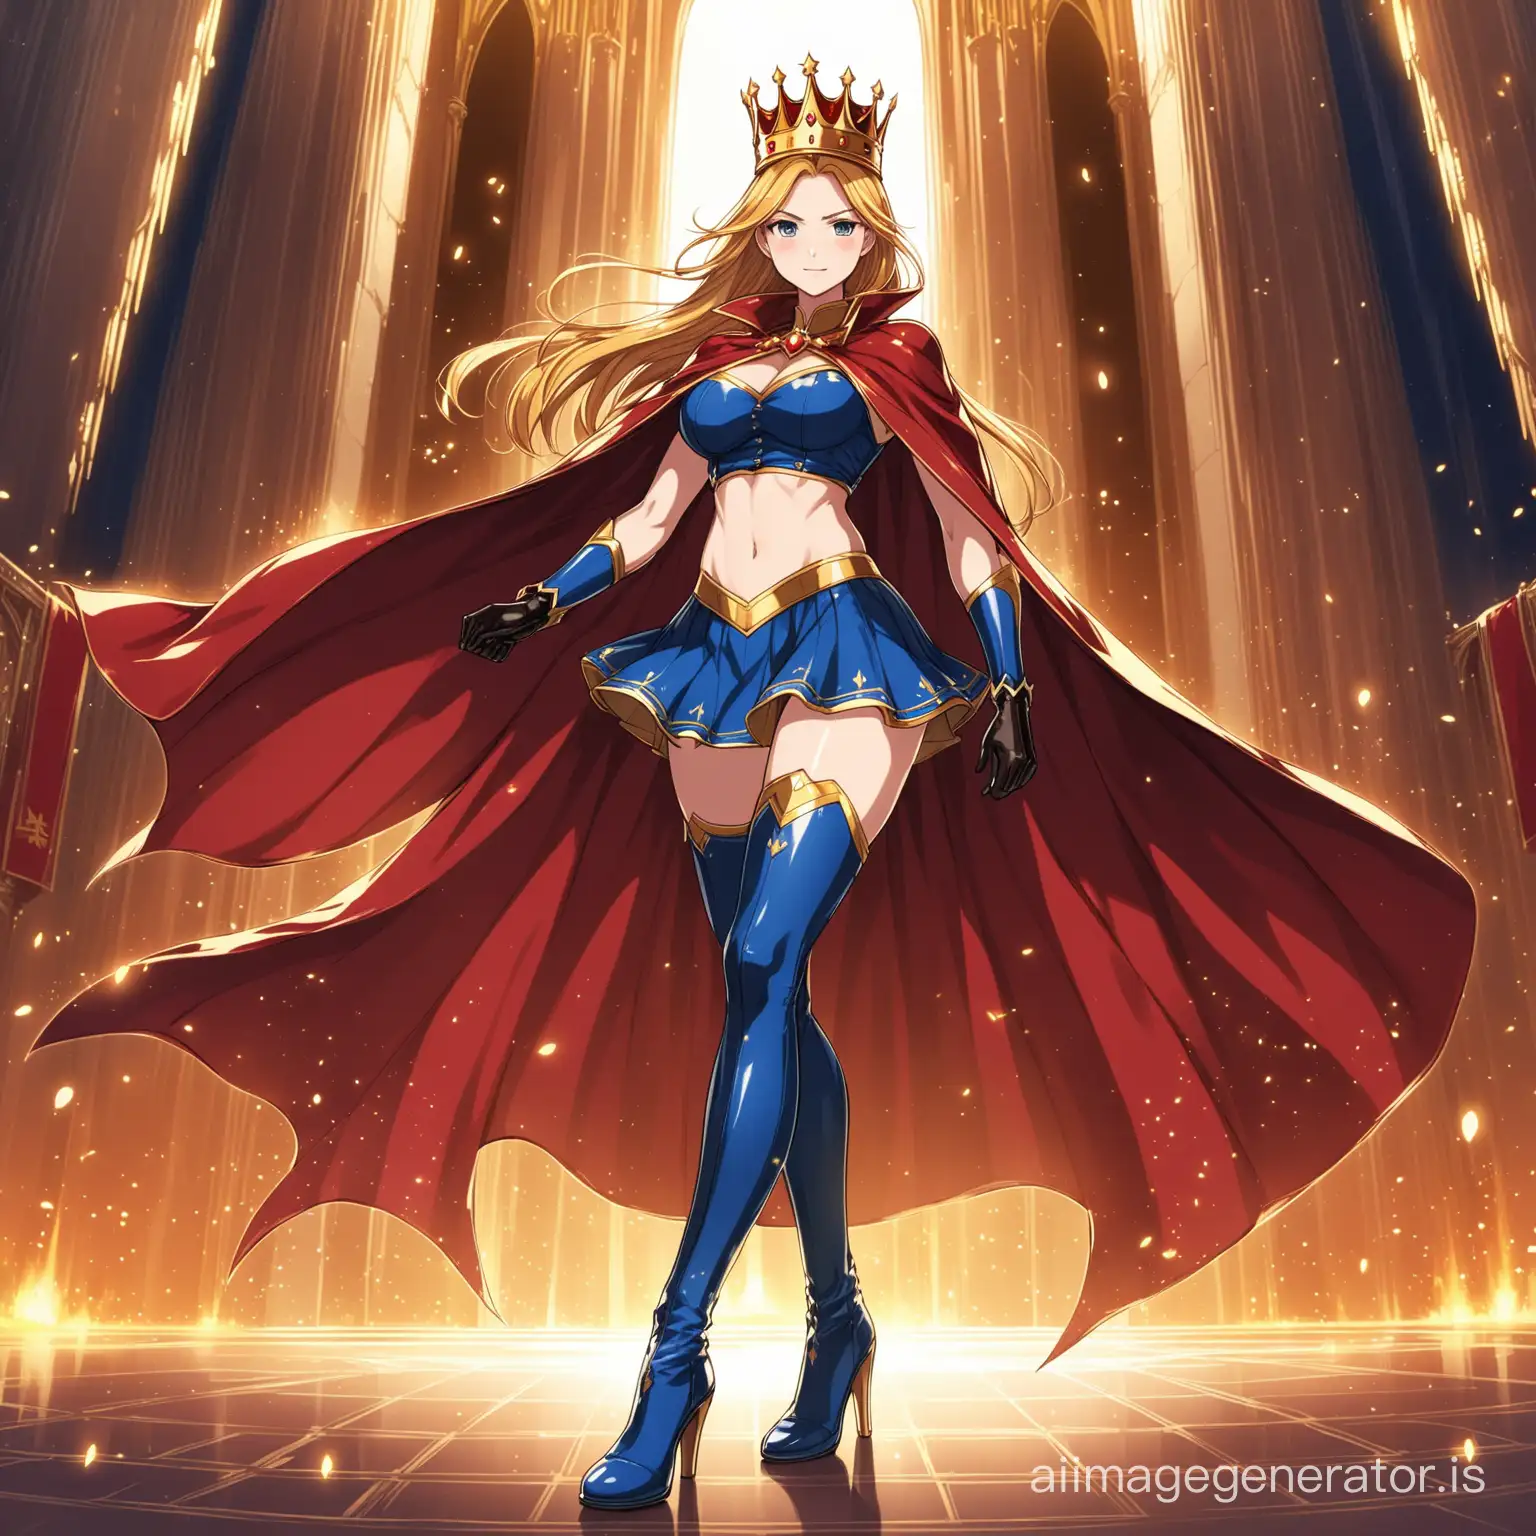 hot anime girl in a royal superhero costume wearing a croptop, a formal skirt, long leather gloves, long boots heels and a cape along with a crown